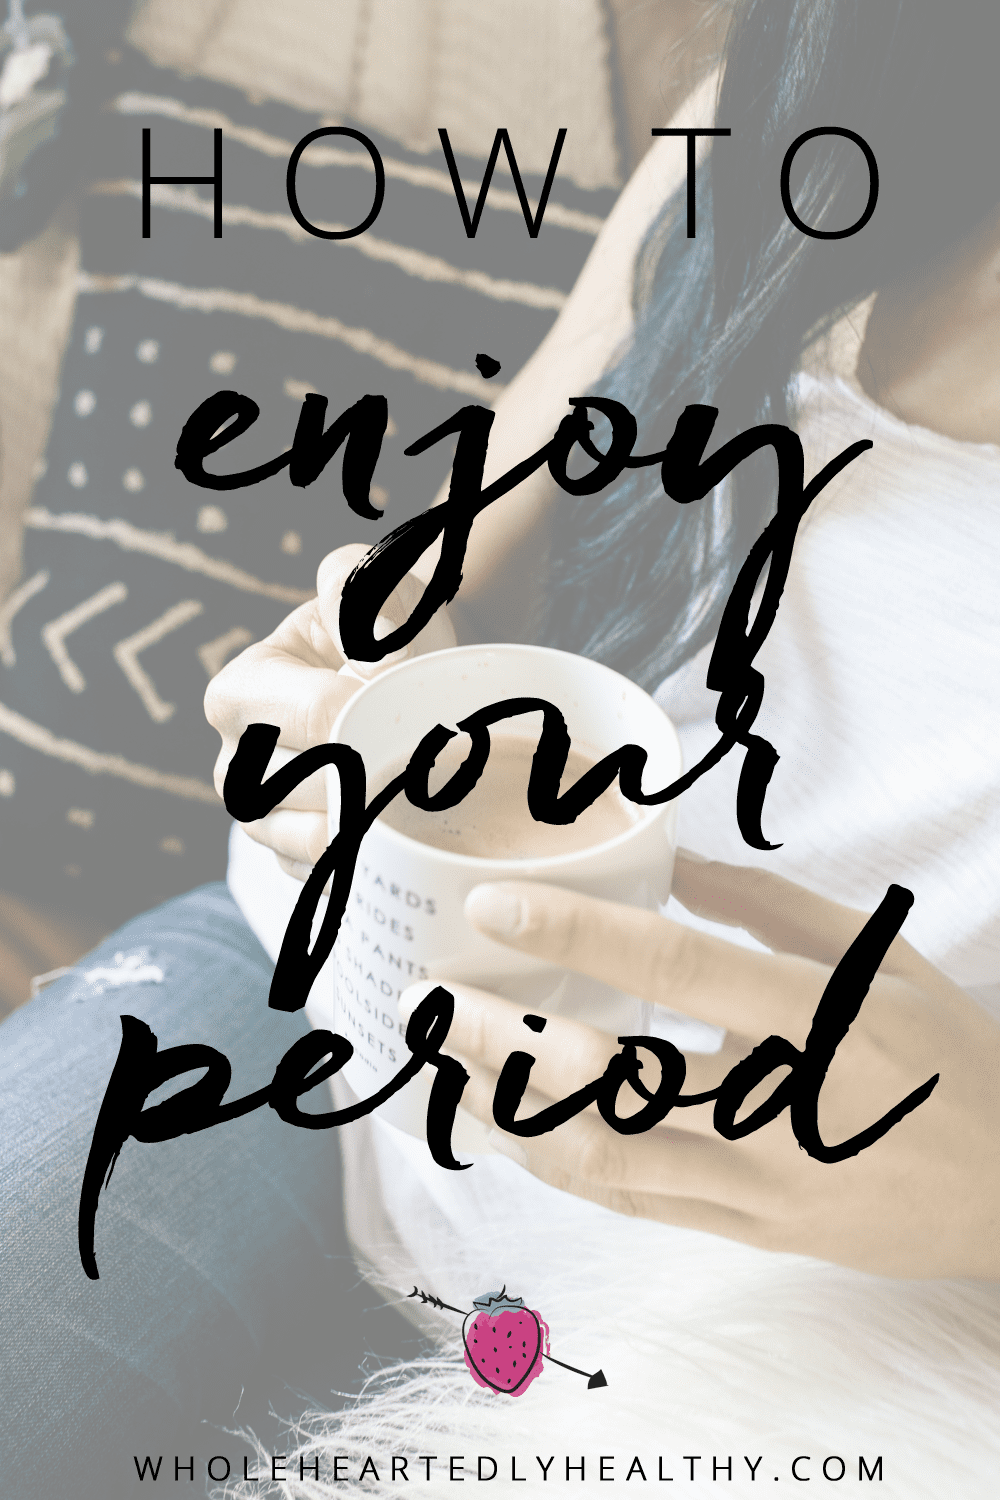 How to enjoy your period